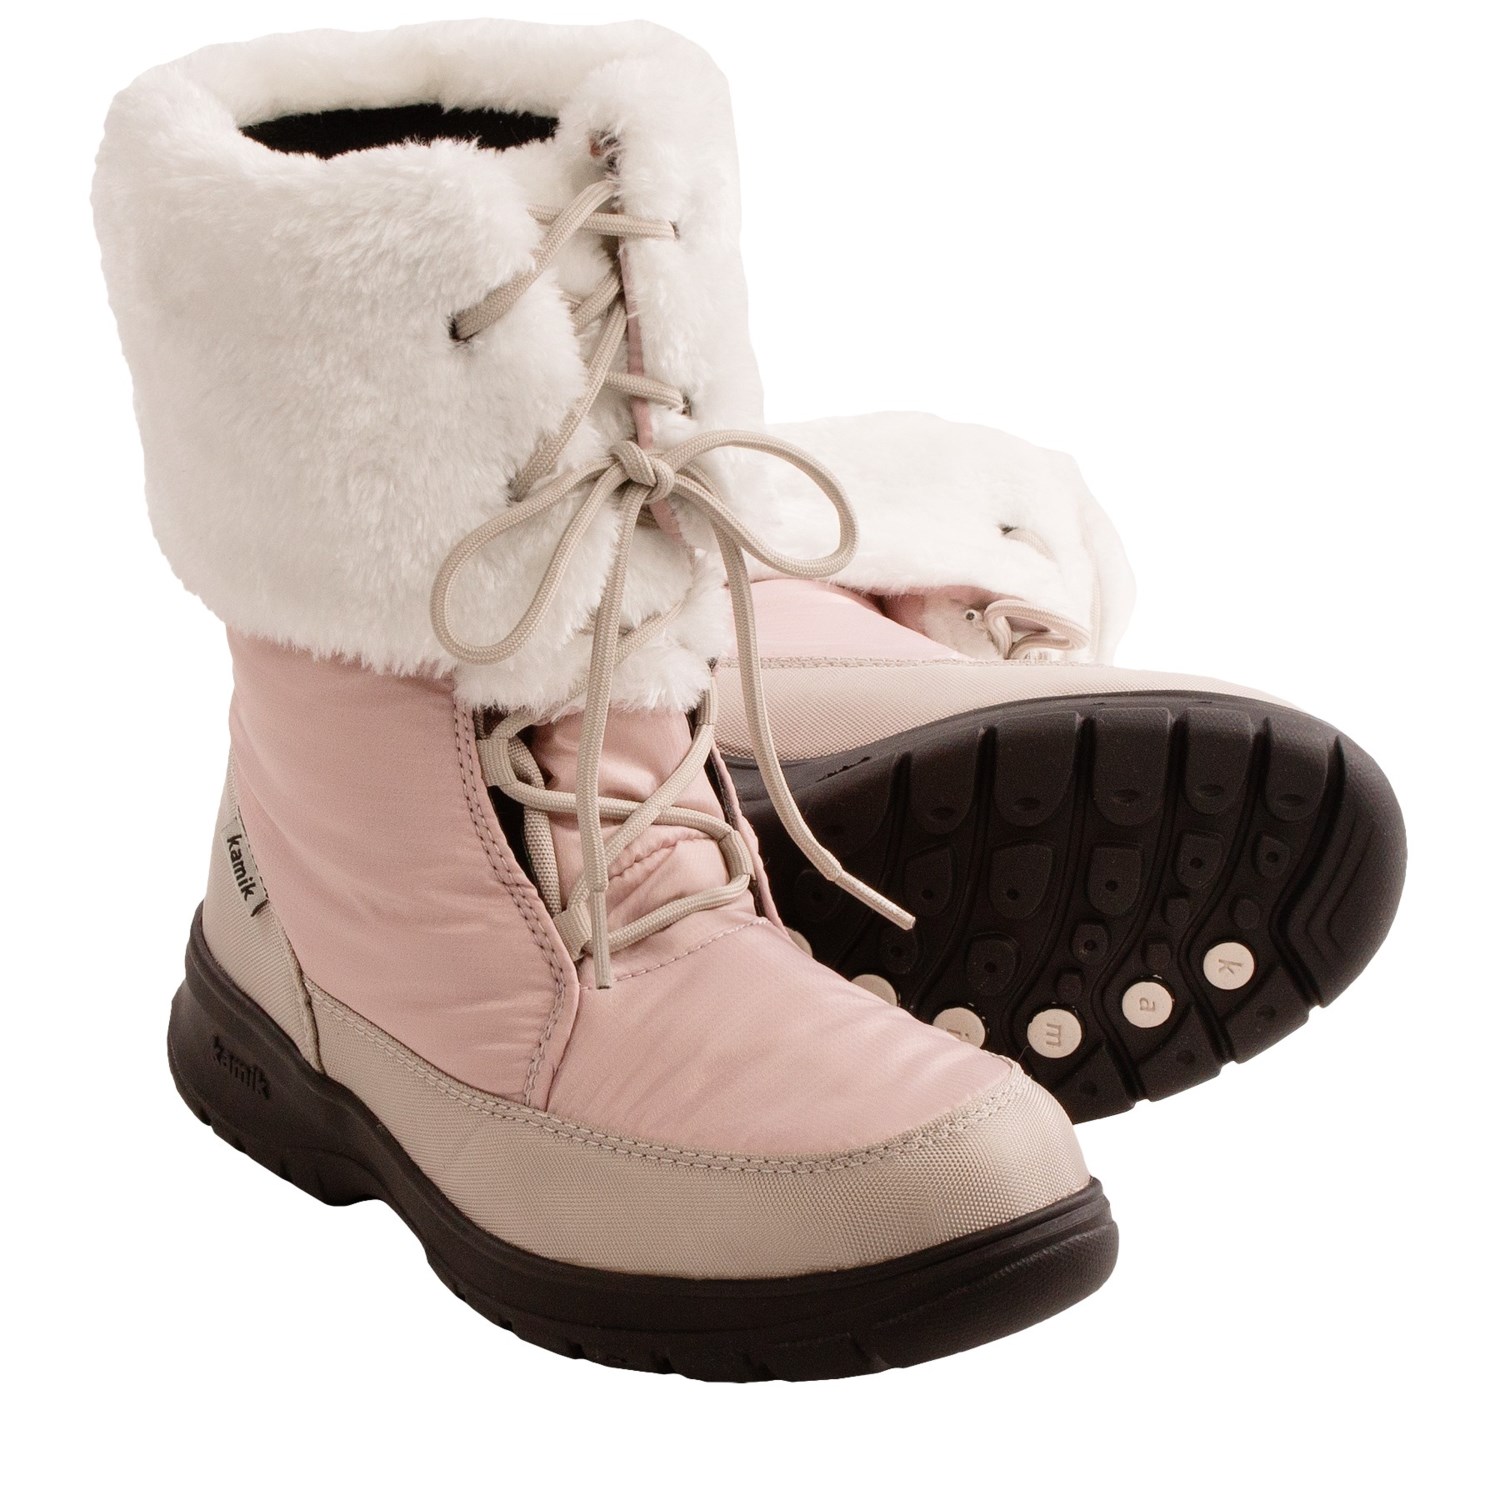 Insulated Snow Boots For Women - Yu Boots